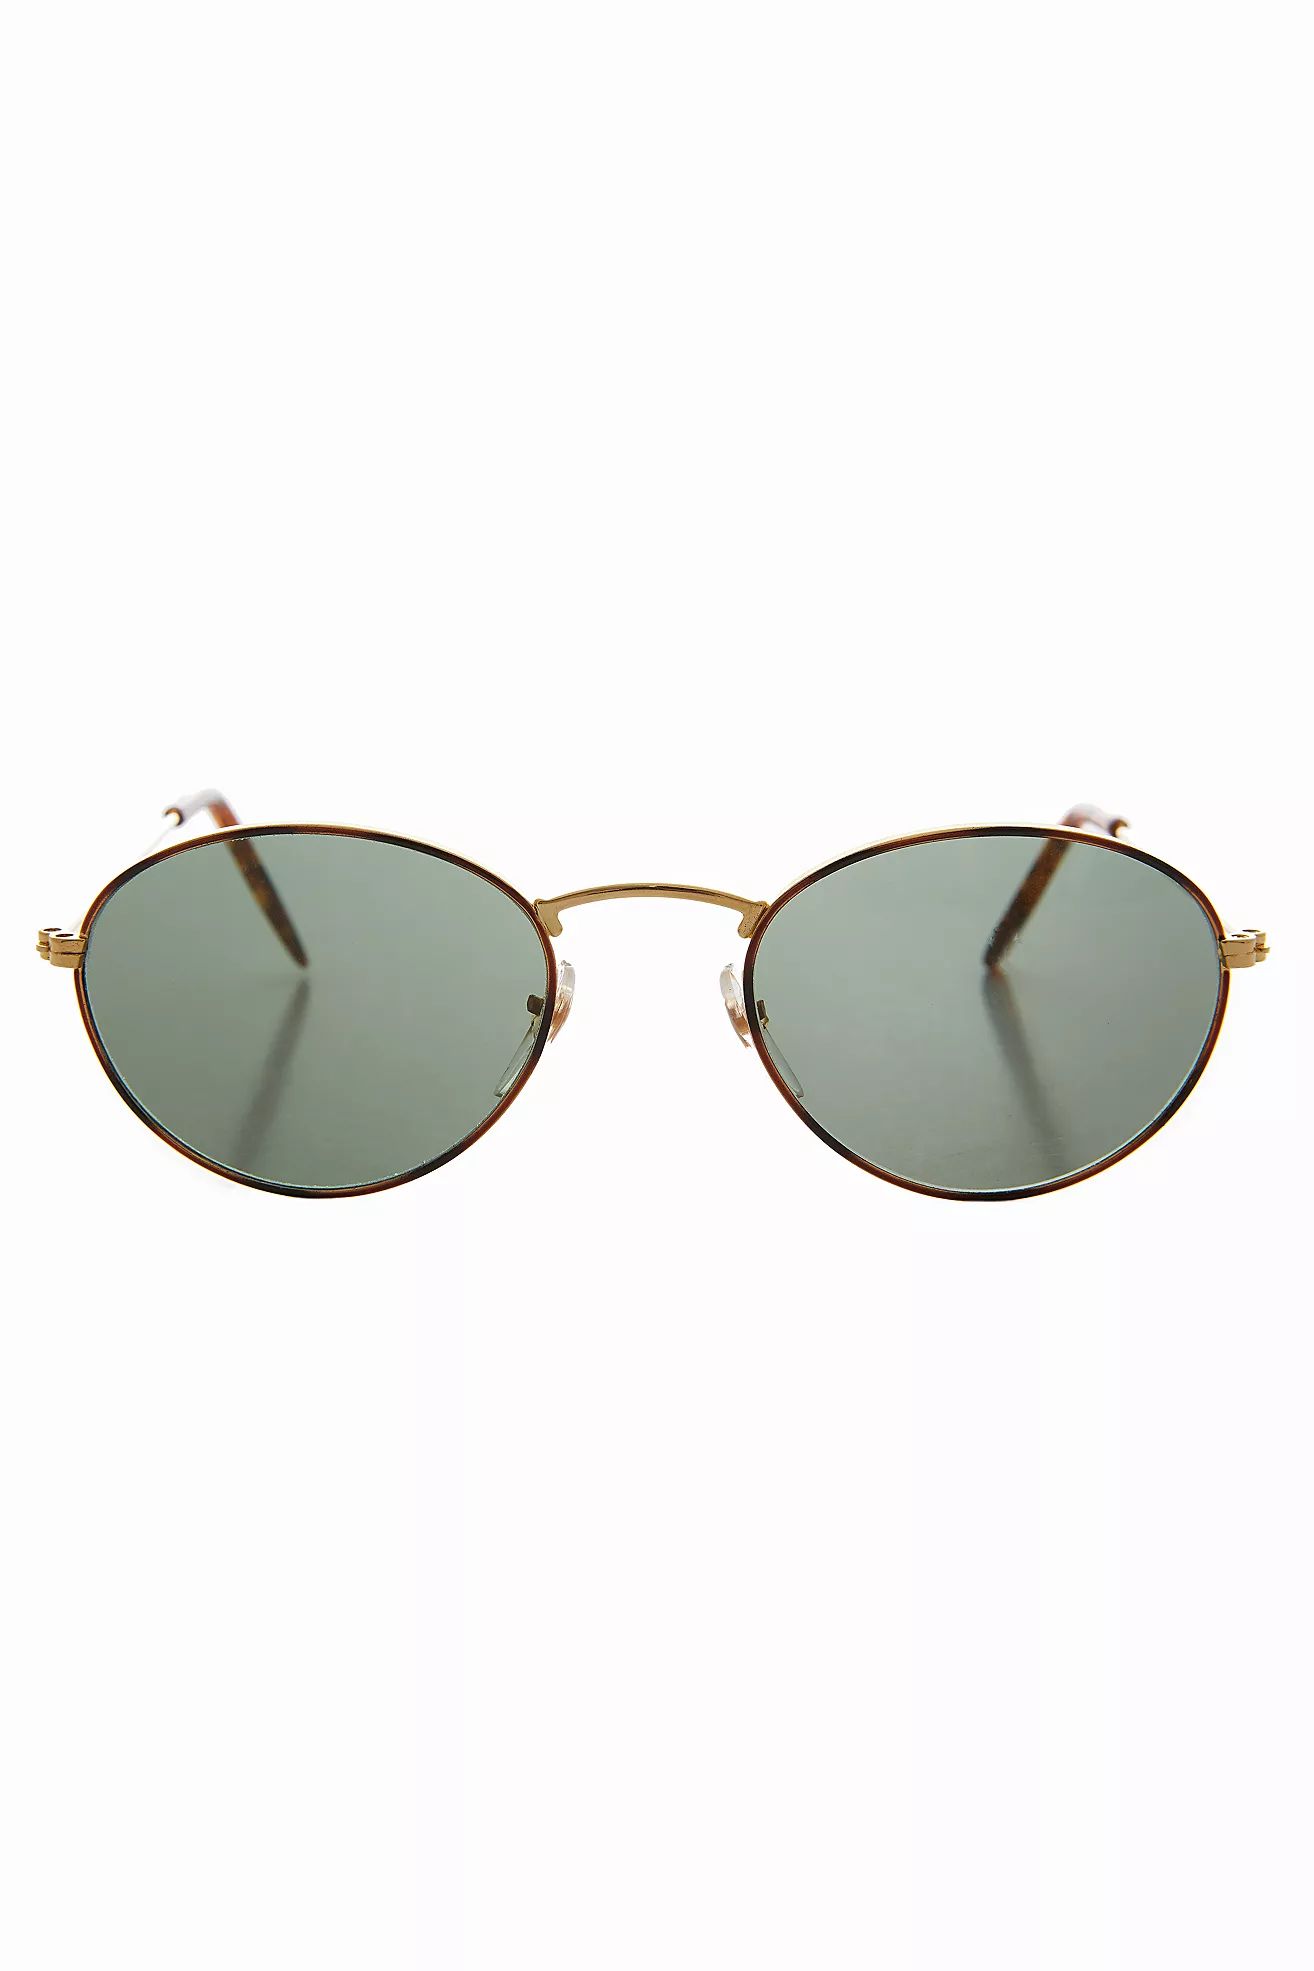 Vintage Dove Sunglasses Selected by Sunglass Museum | Free People (Global - UK&FR Excluded)